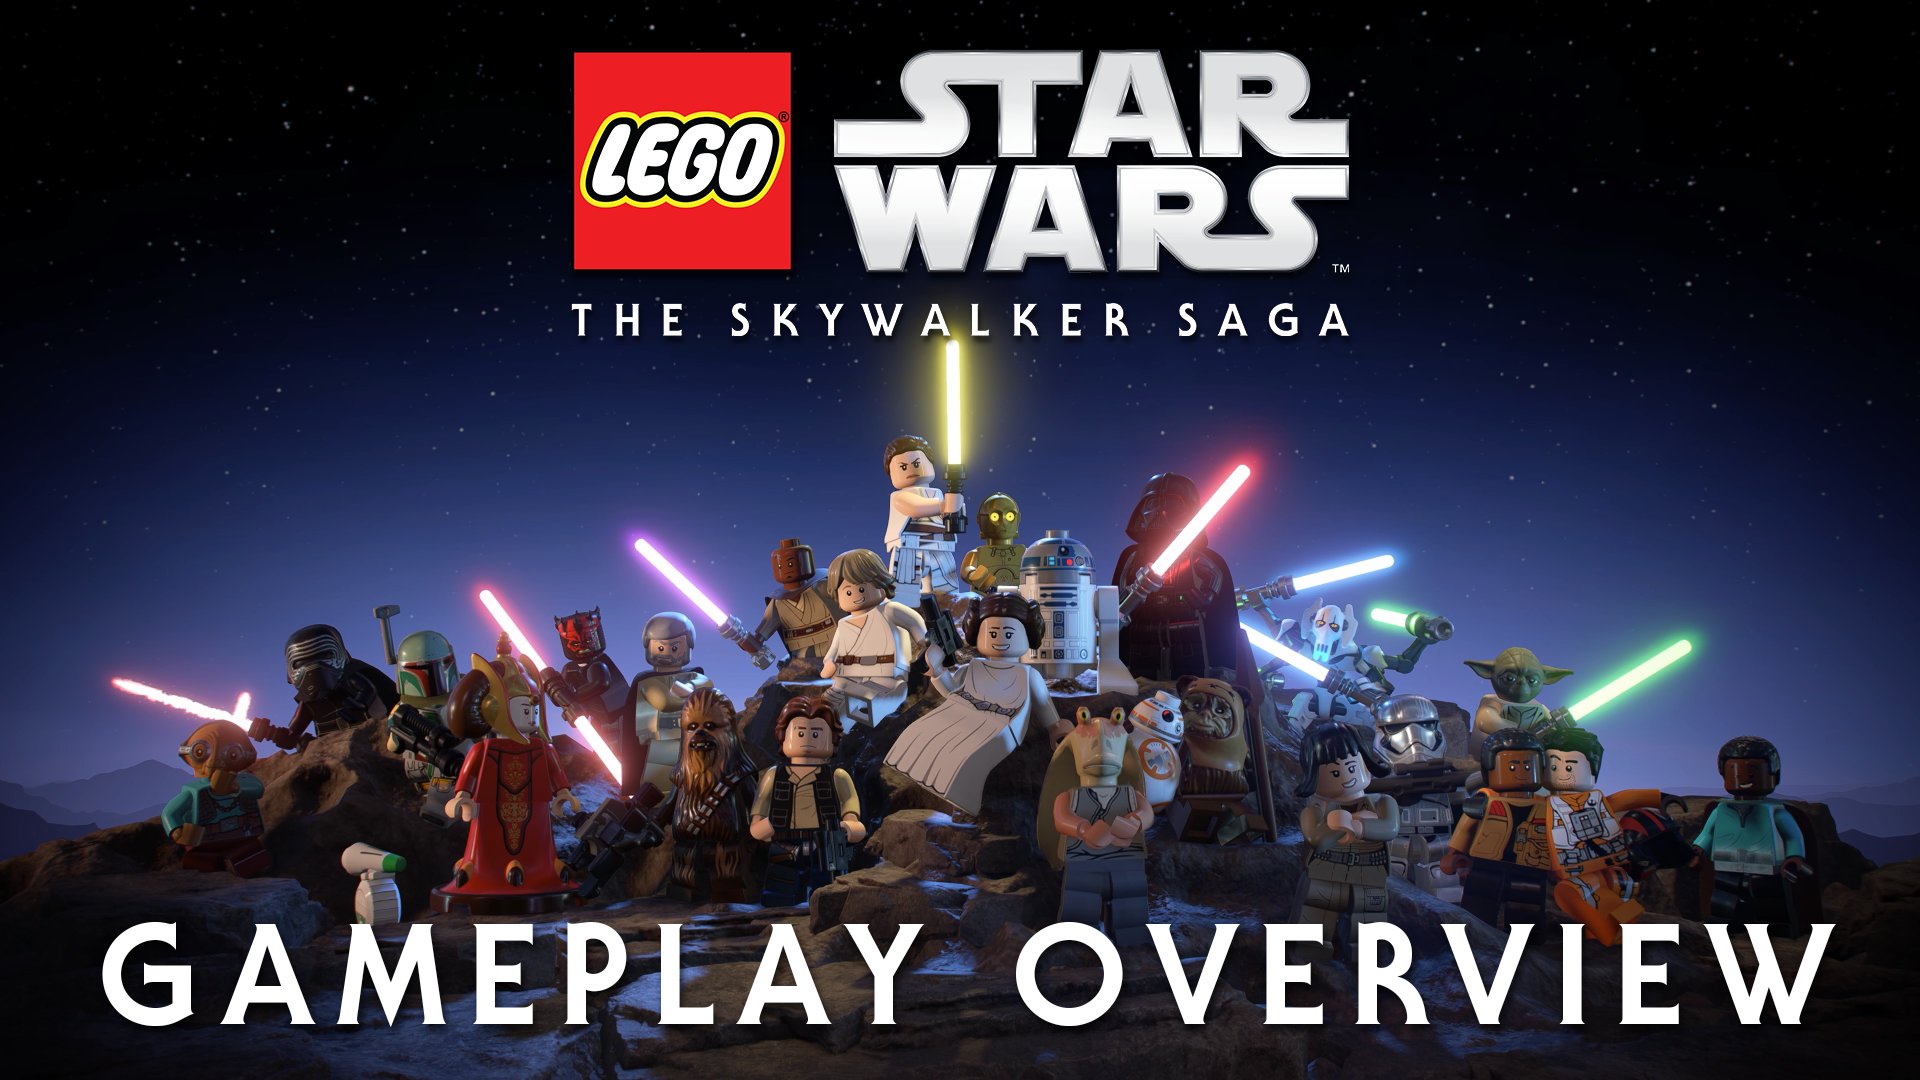 TT Games on Twitter: "LEGO® Star Wars™: Skywalker will launch on 5th April Watch the trailer here: https://t.co/uU6hZXx24q Everyone at TT Games thanks you all your patience as